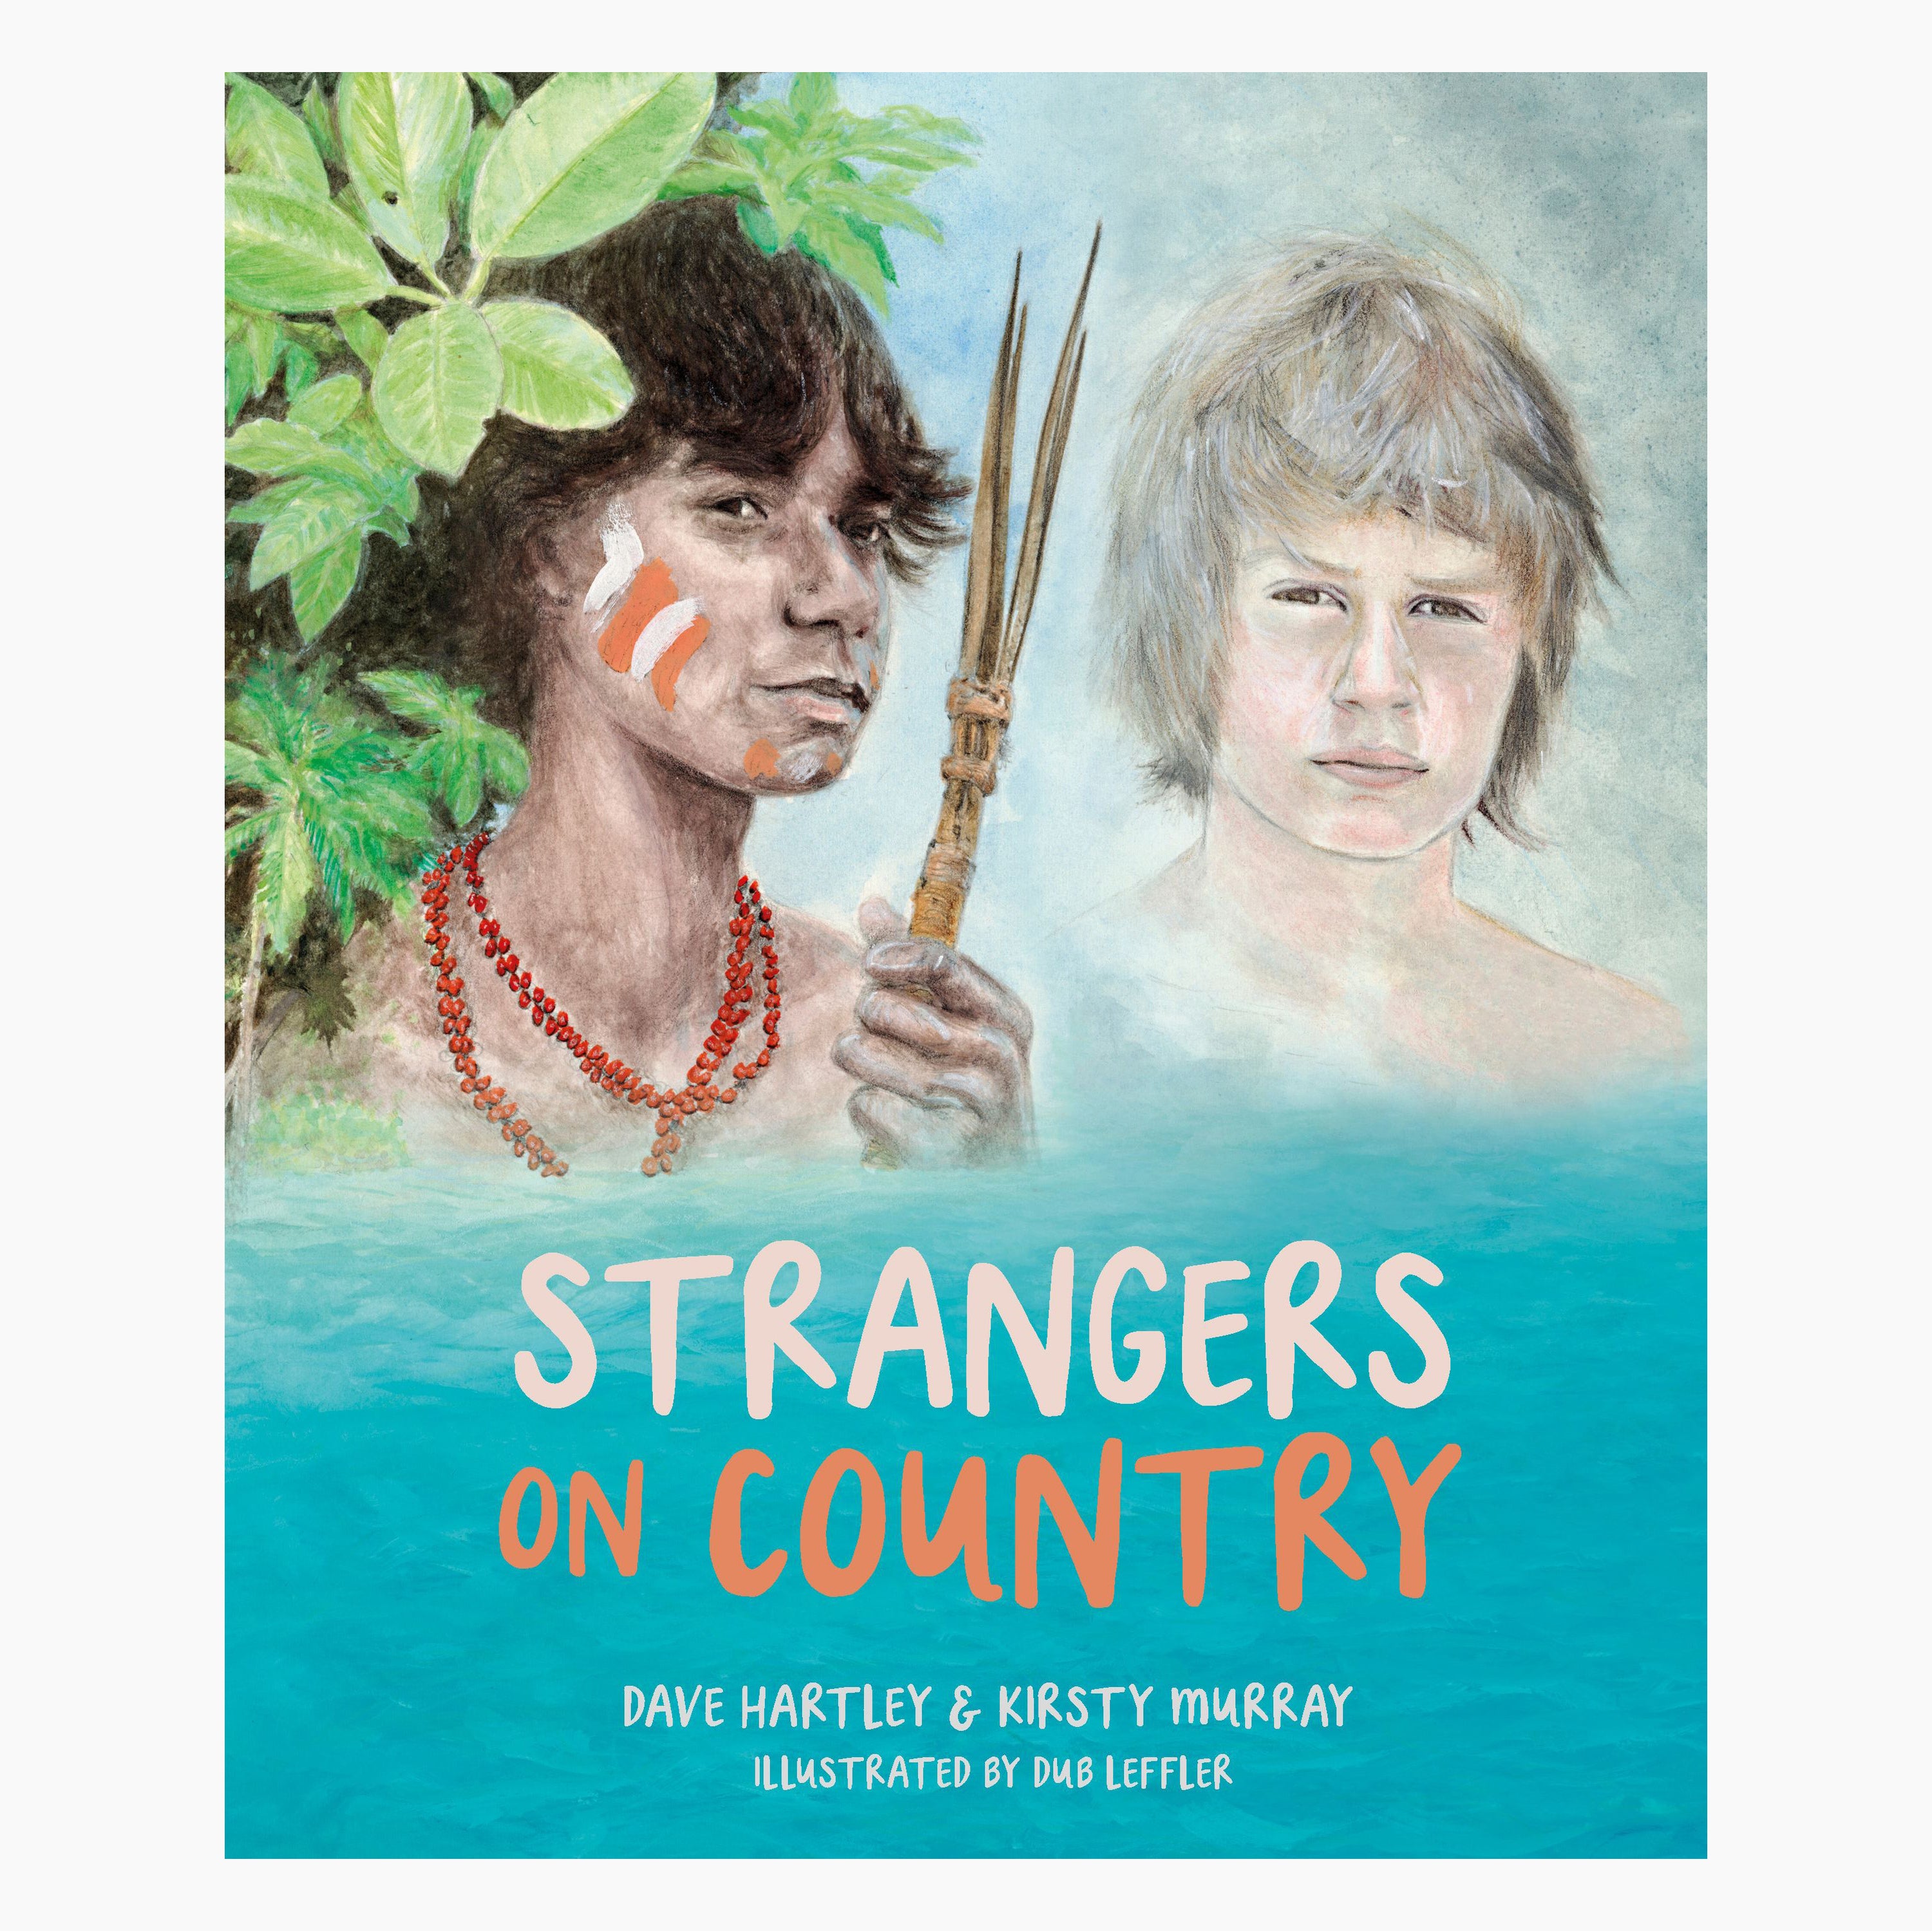 Strangers on Country